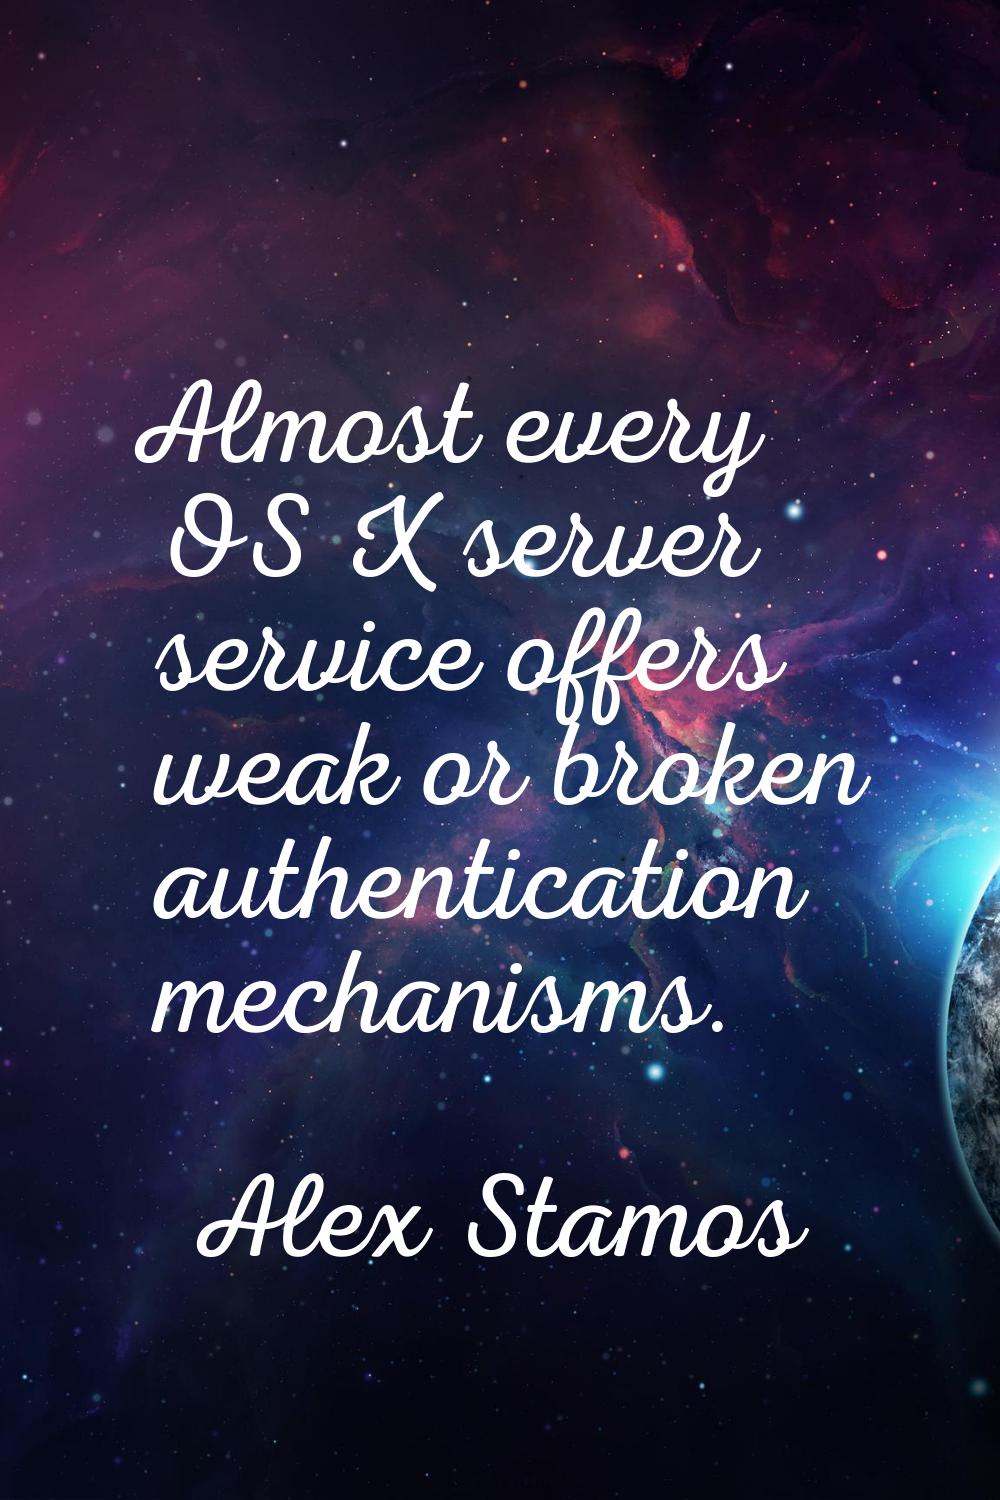 Almost every OS X server service offers weak or broken authentication mechanisms.